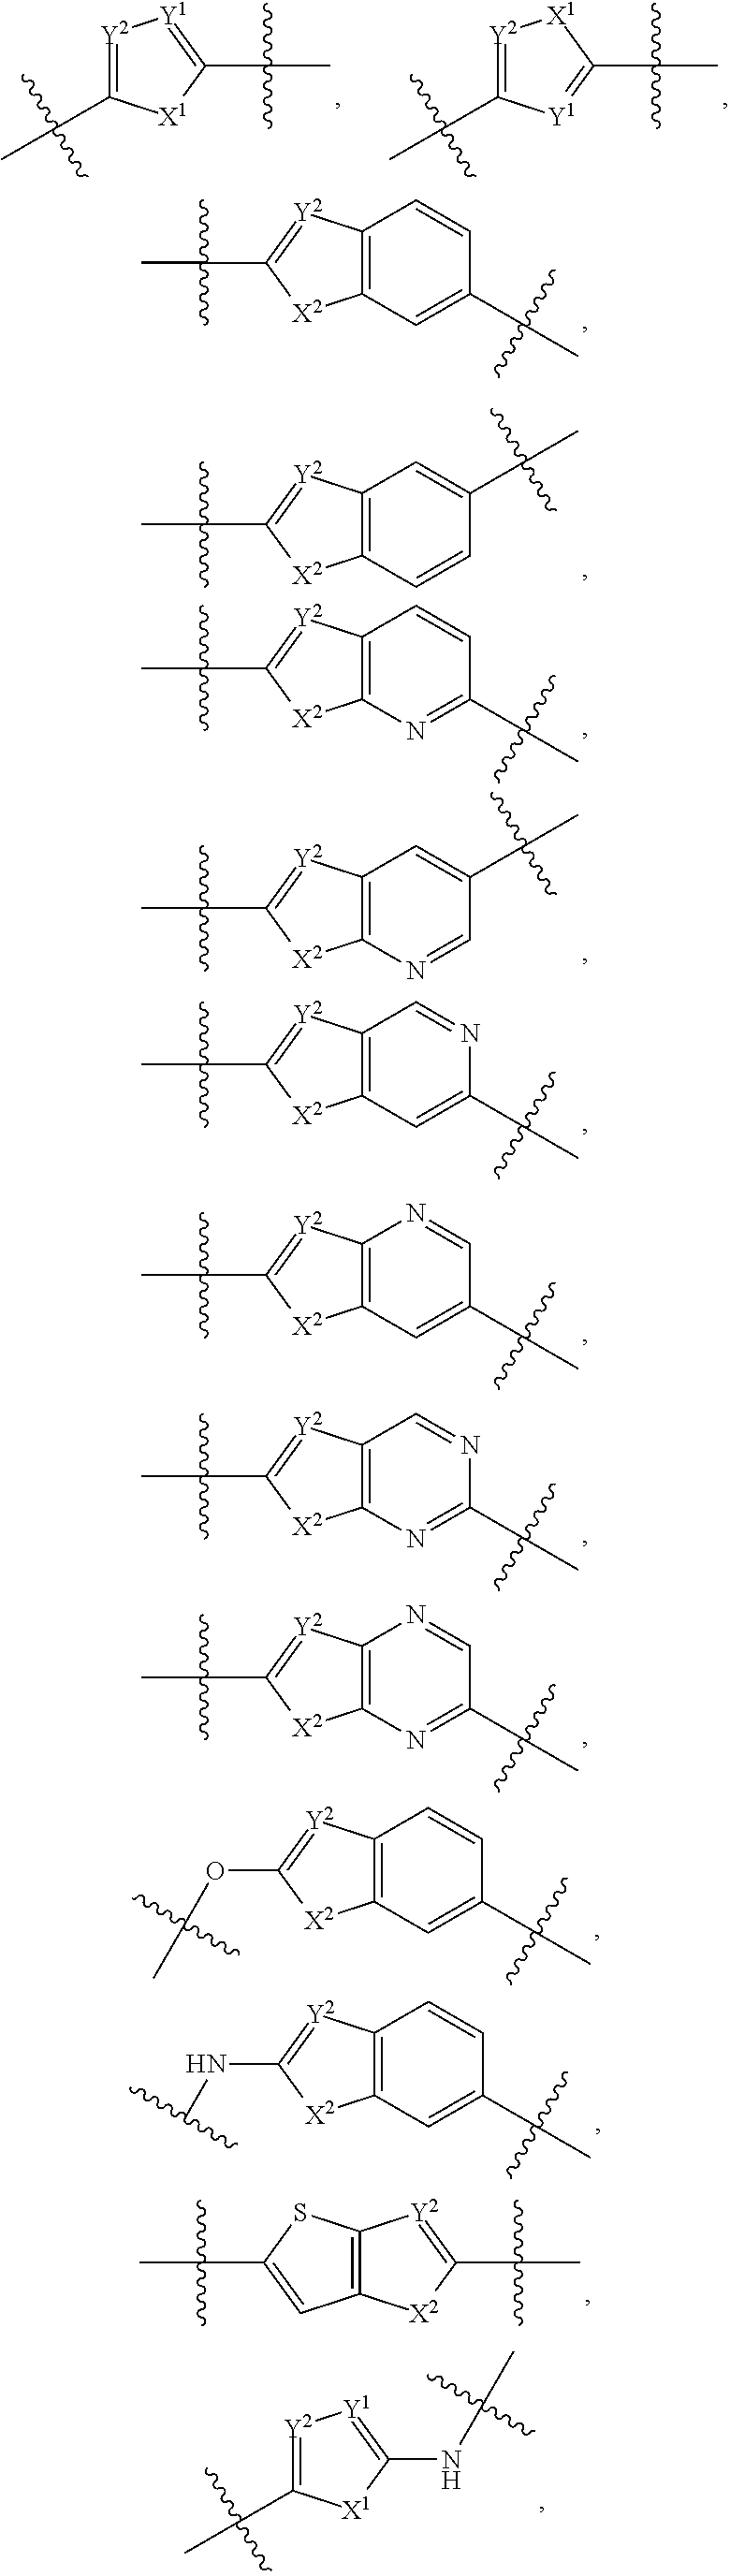 Fused ring compounds as hepatitis c virus inhibitors, pharmaceutical compositions and uses thereof